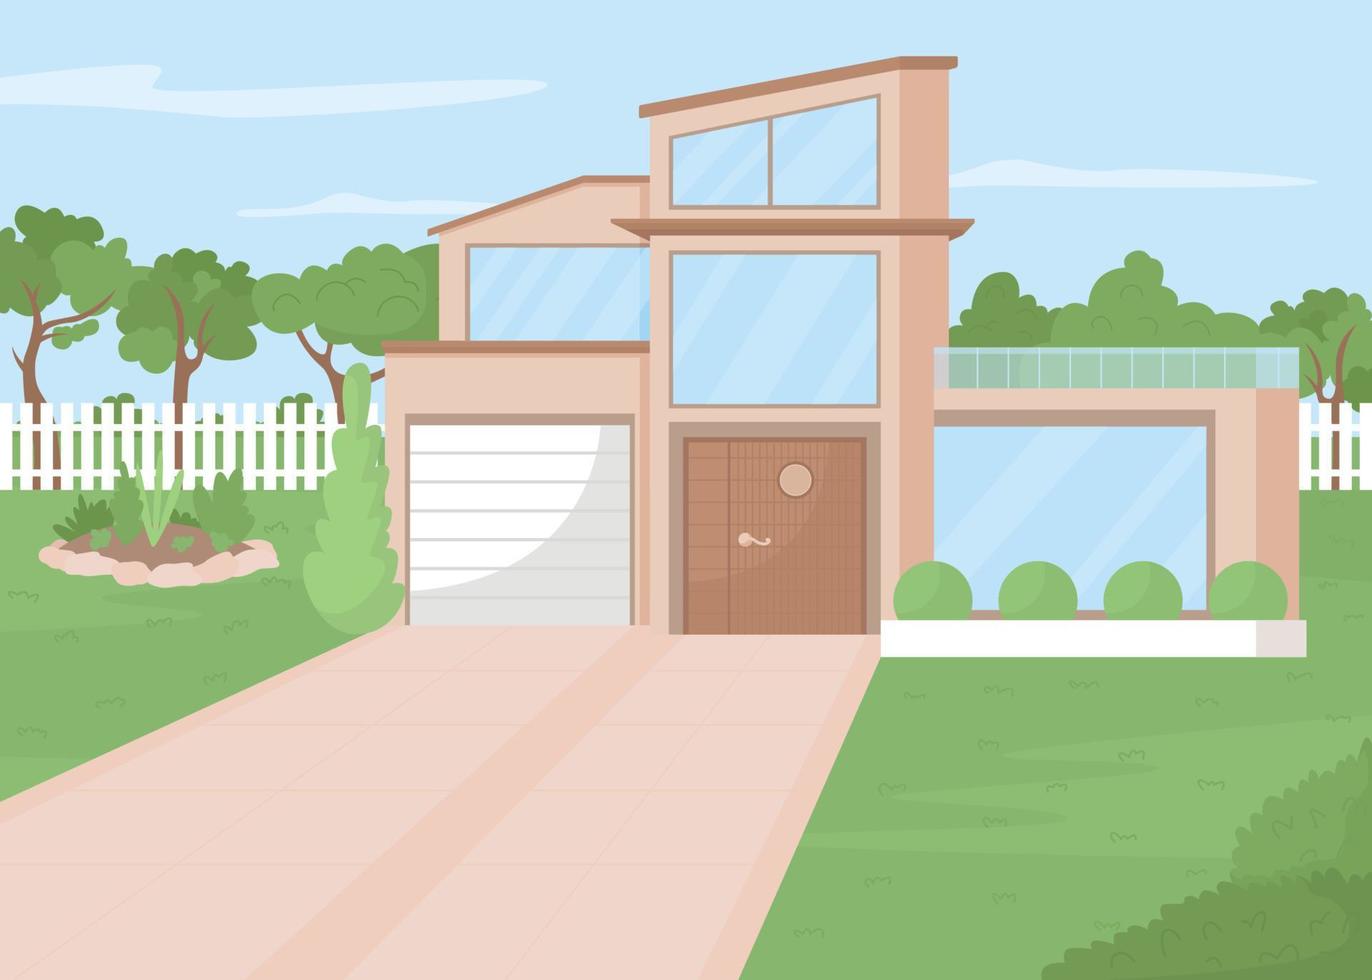 Luxury house with garden flat color vector illustration